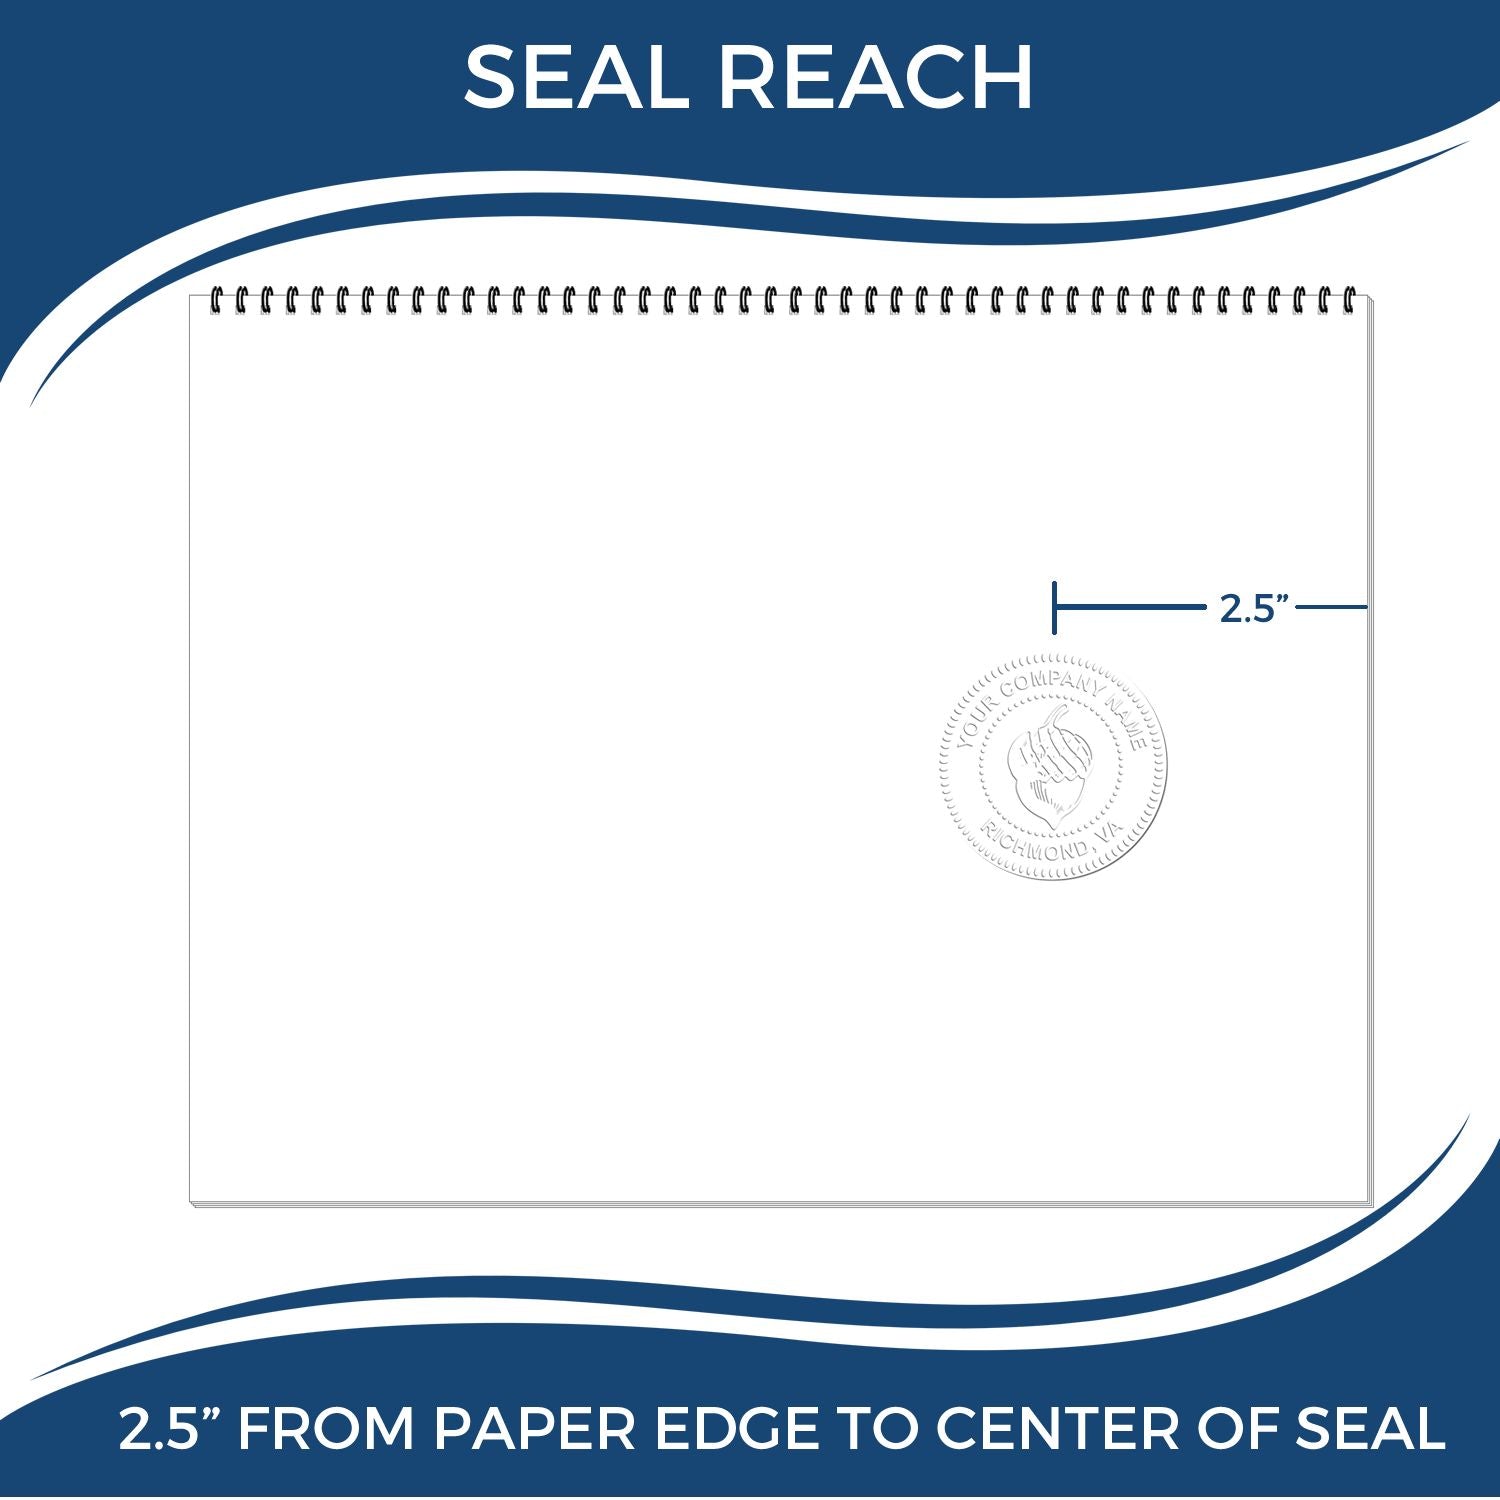 An infographic showing the seal reach which is represented by a ruler and a miniature seal image of the Heavy Duty Cast Iron Tennessee Land Surveyor Seal Embosser